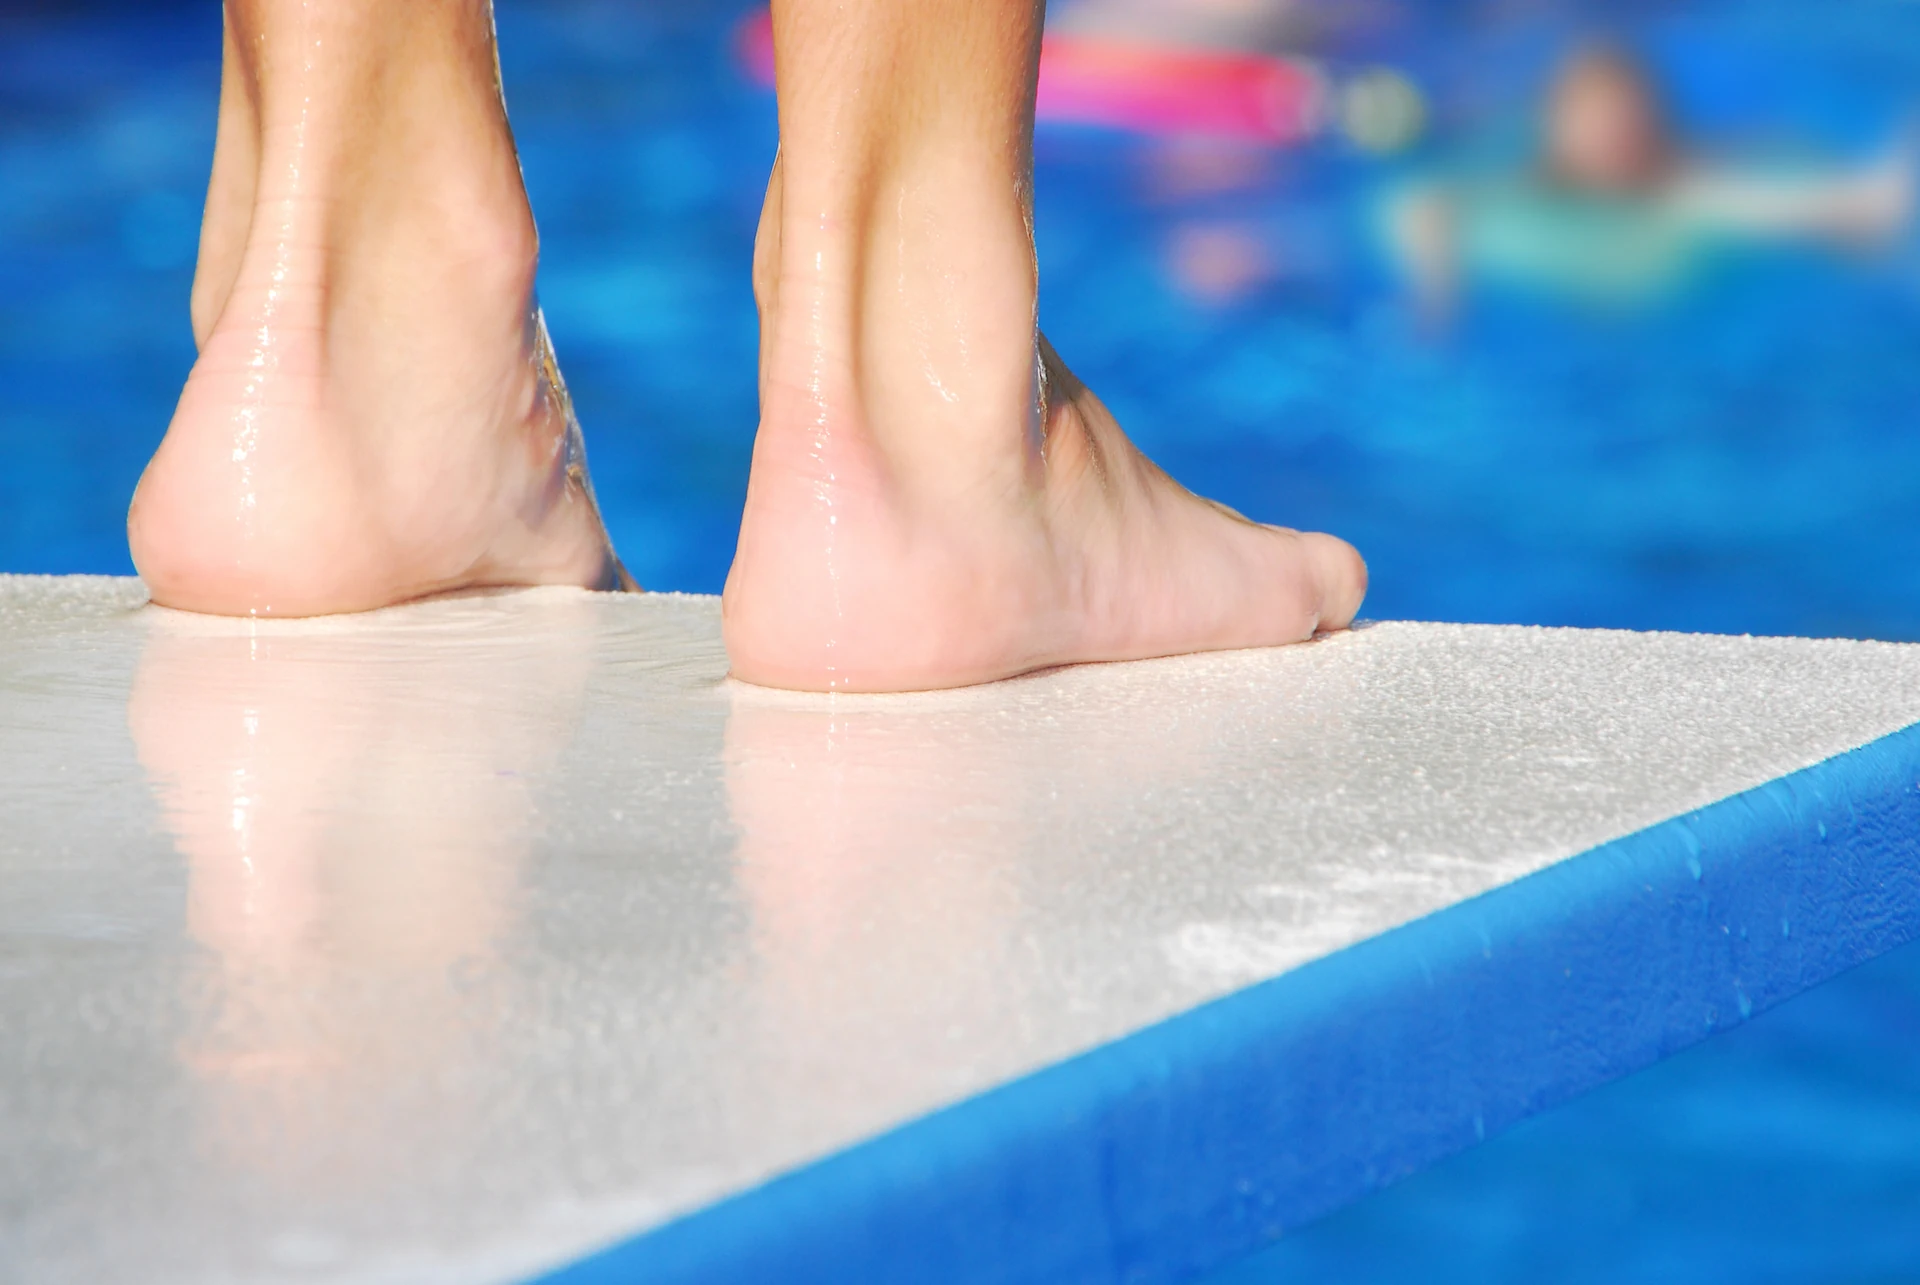 Close-up of a person's feet as they stand at the edge of a diving board. Pool safety tips are essential to pool customers, especially when using a pool like this.